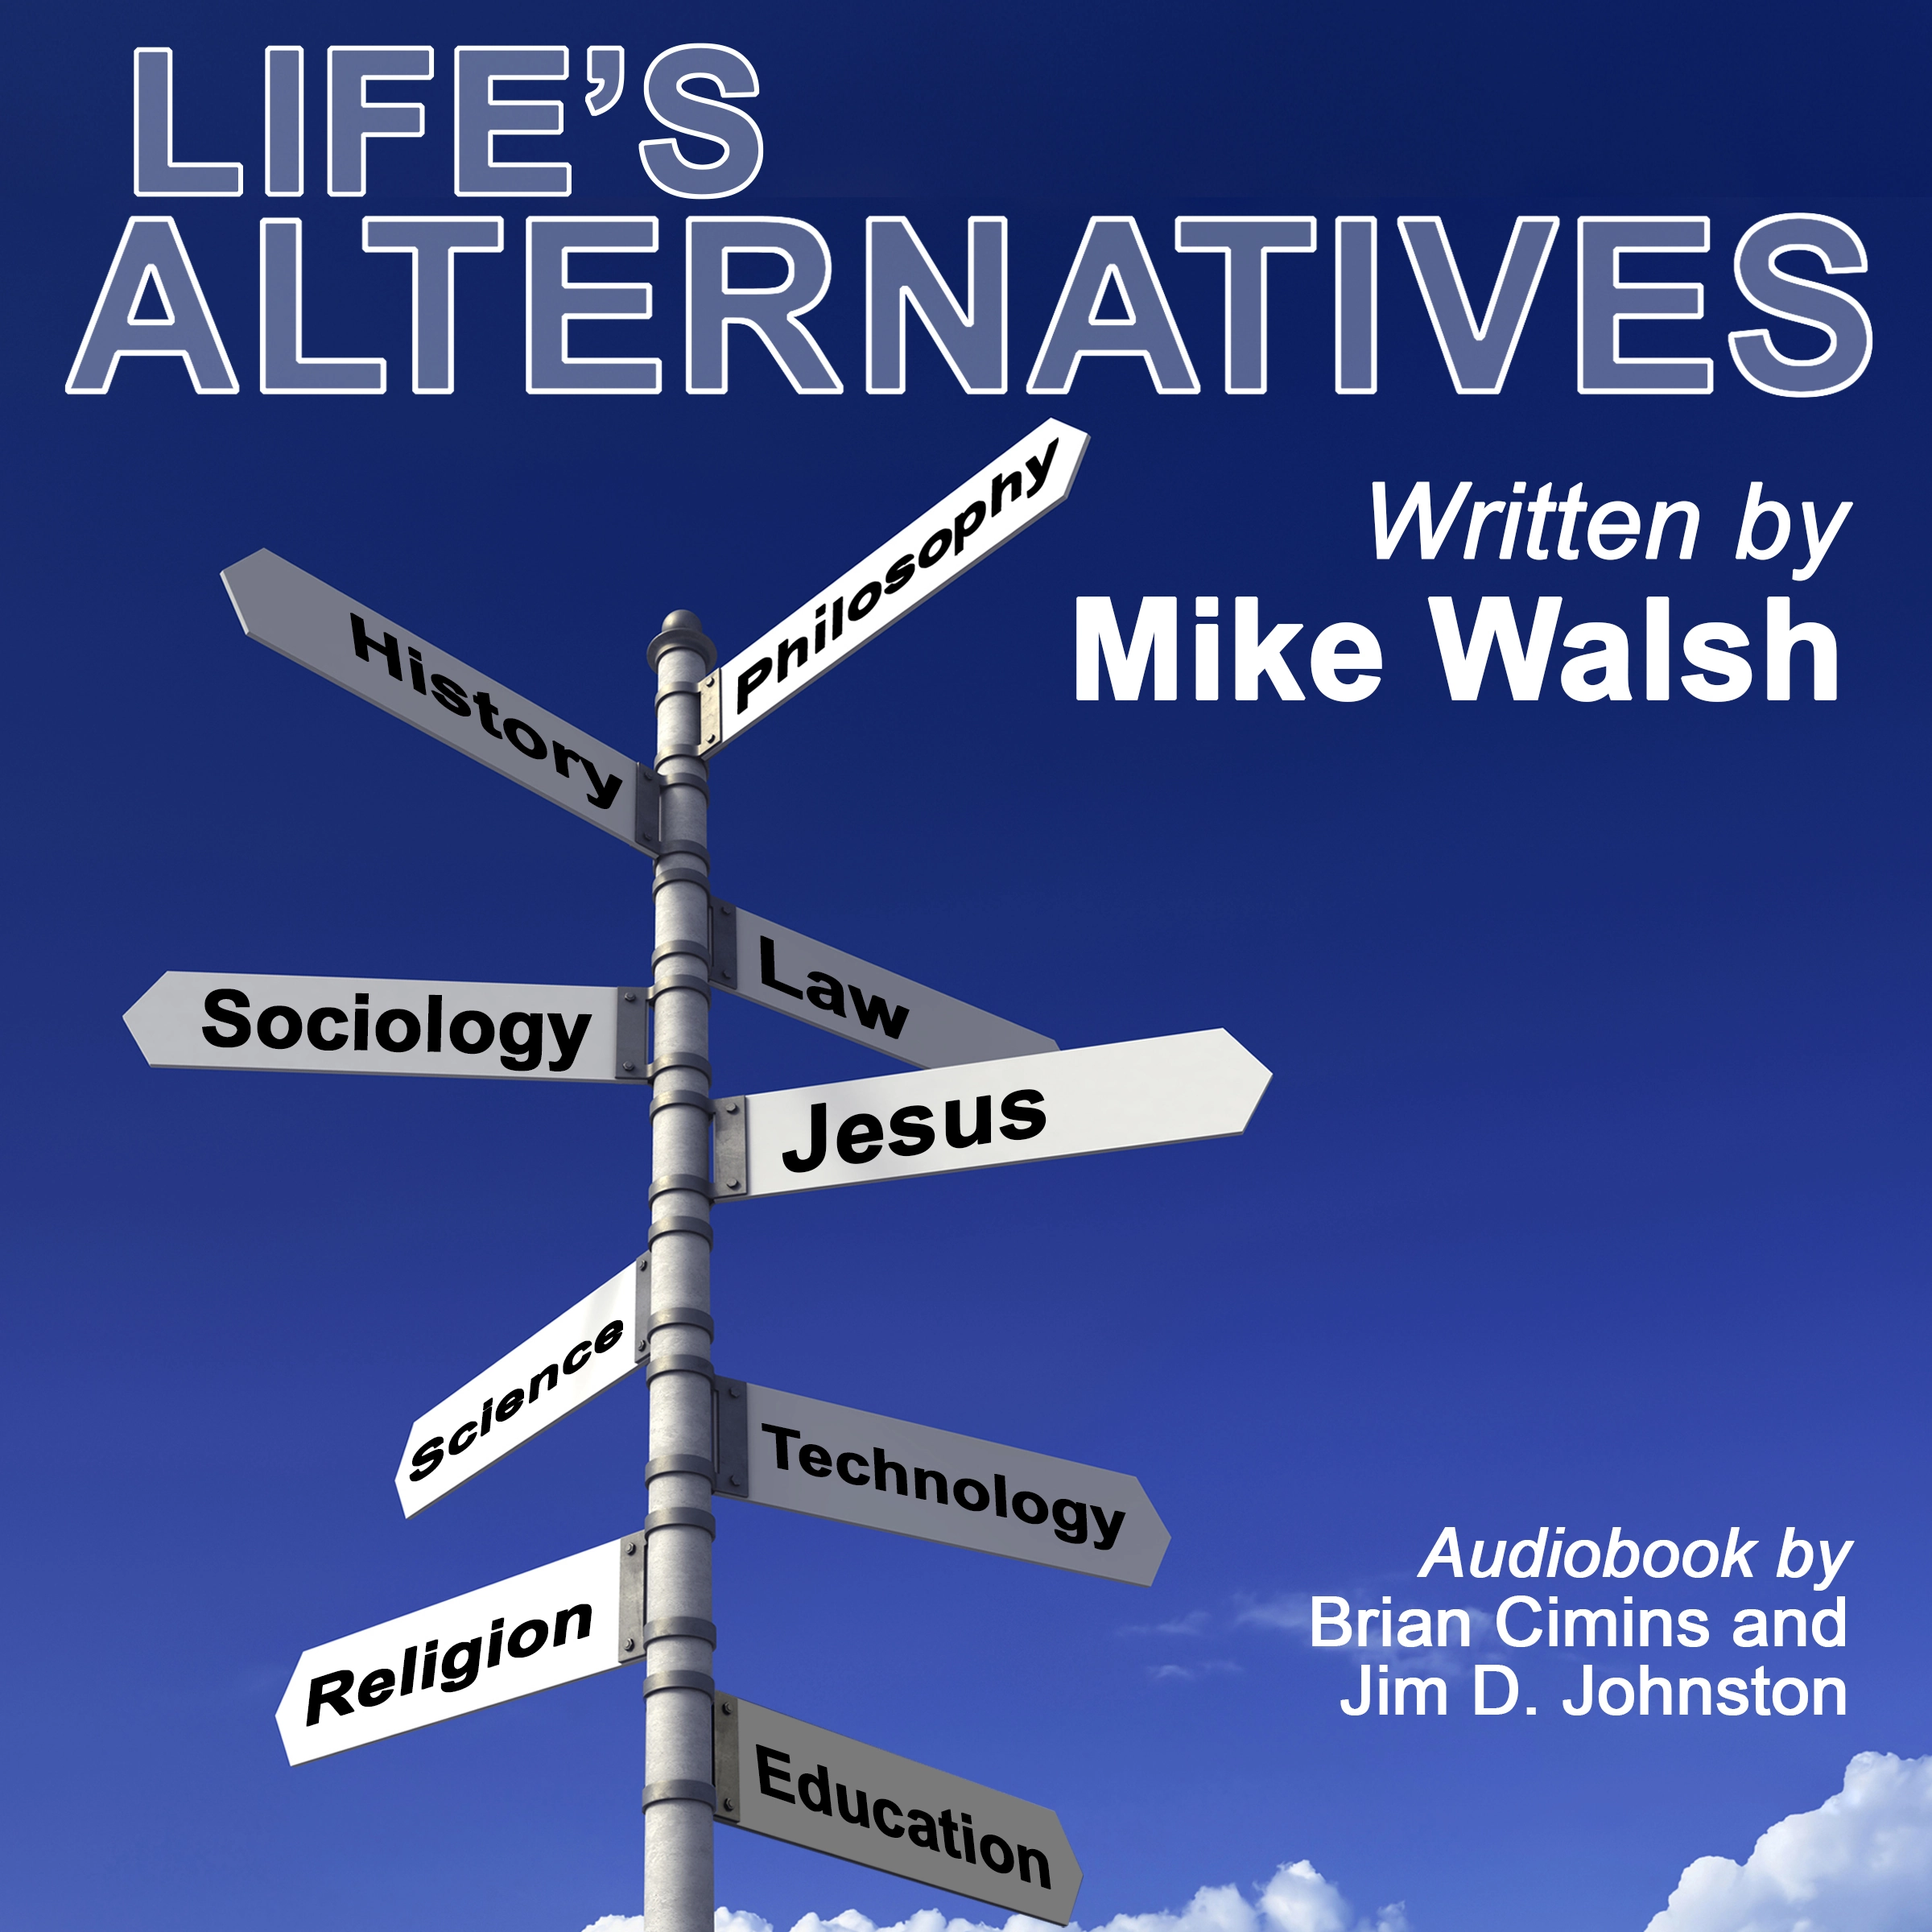 Life's Alternatives Audiobook by Mike Walsh